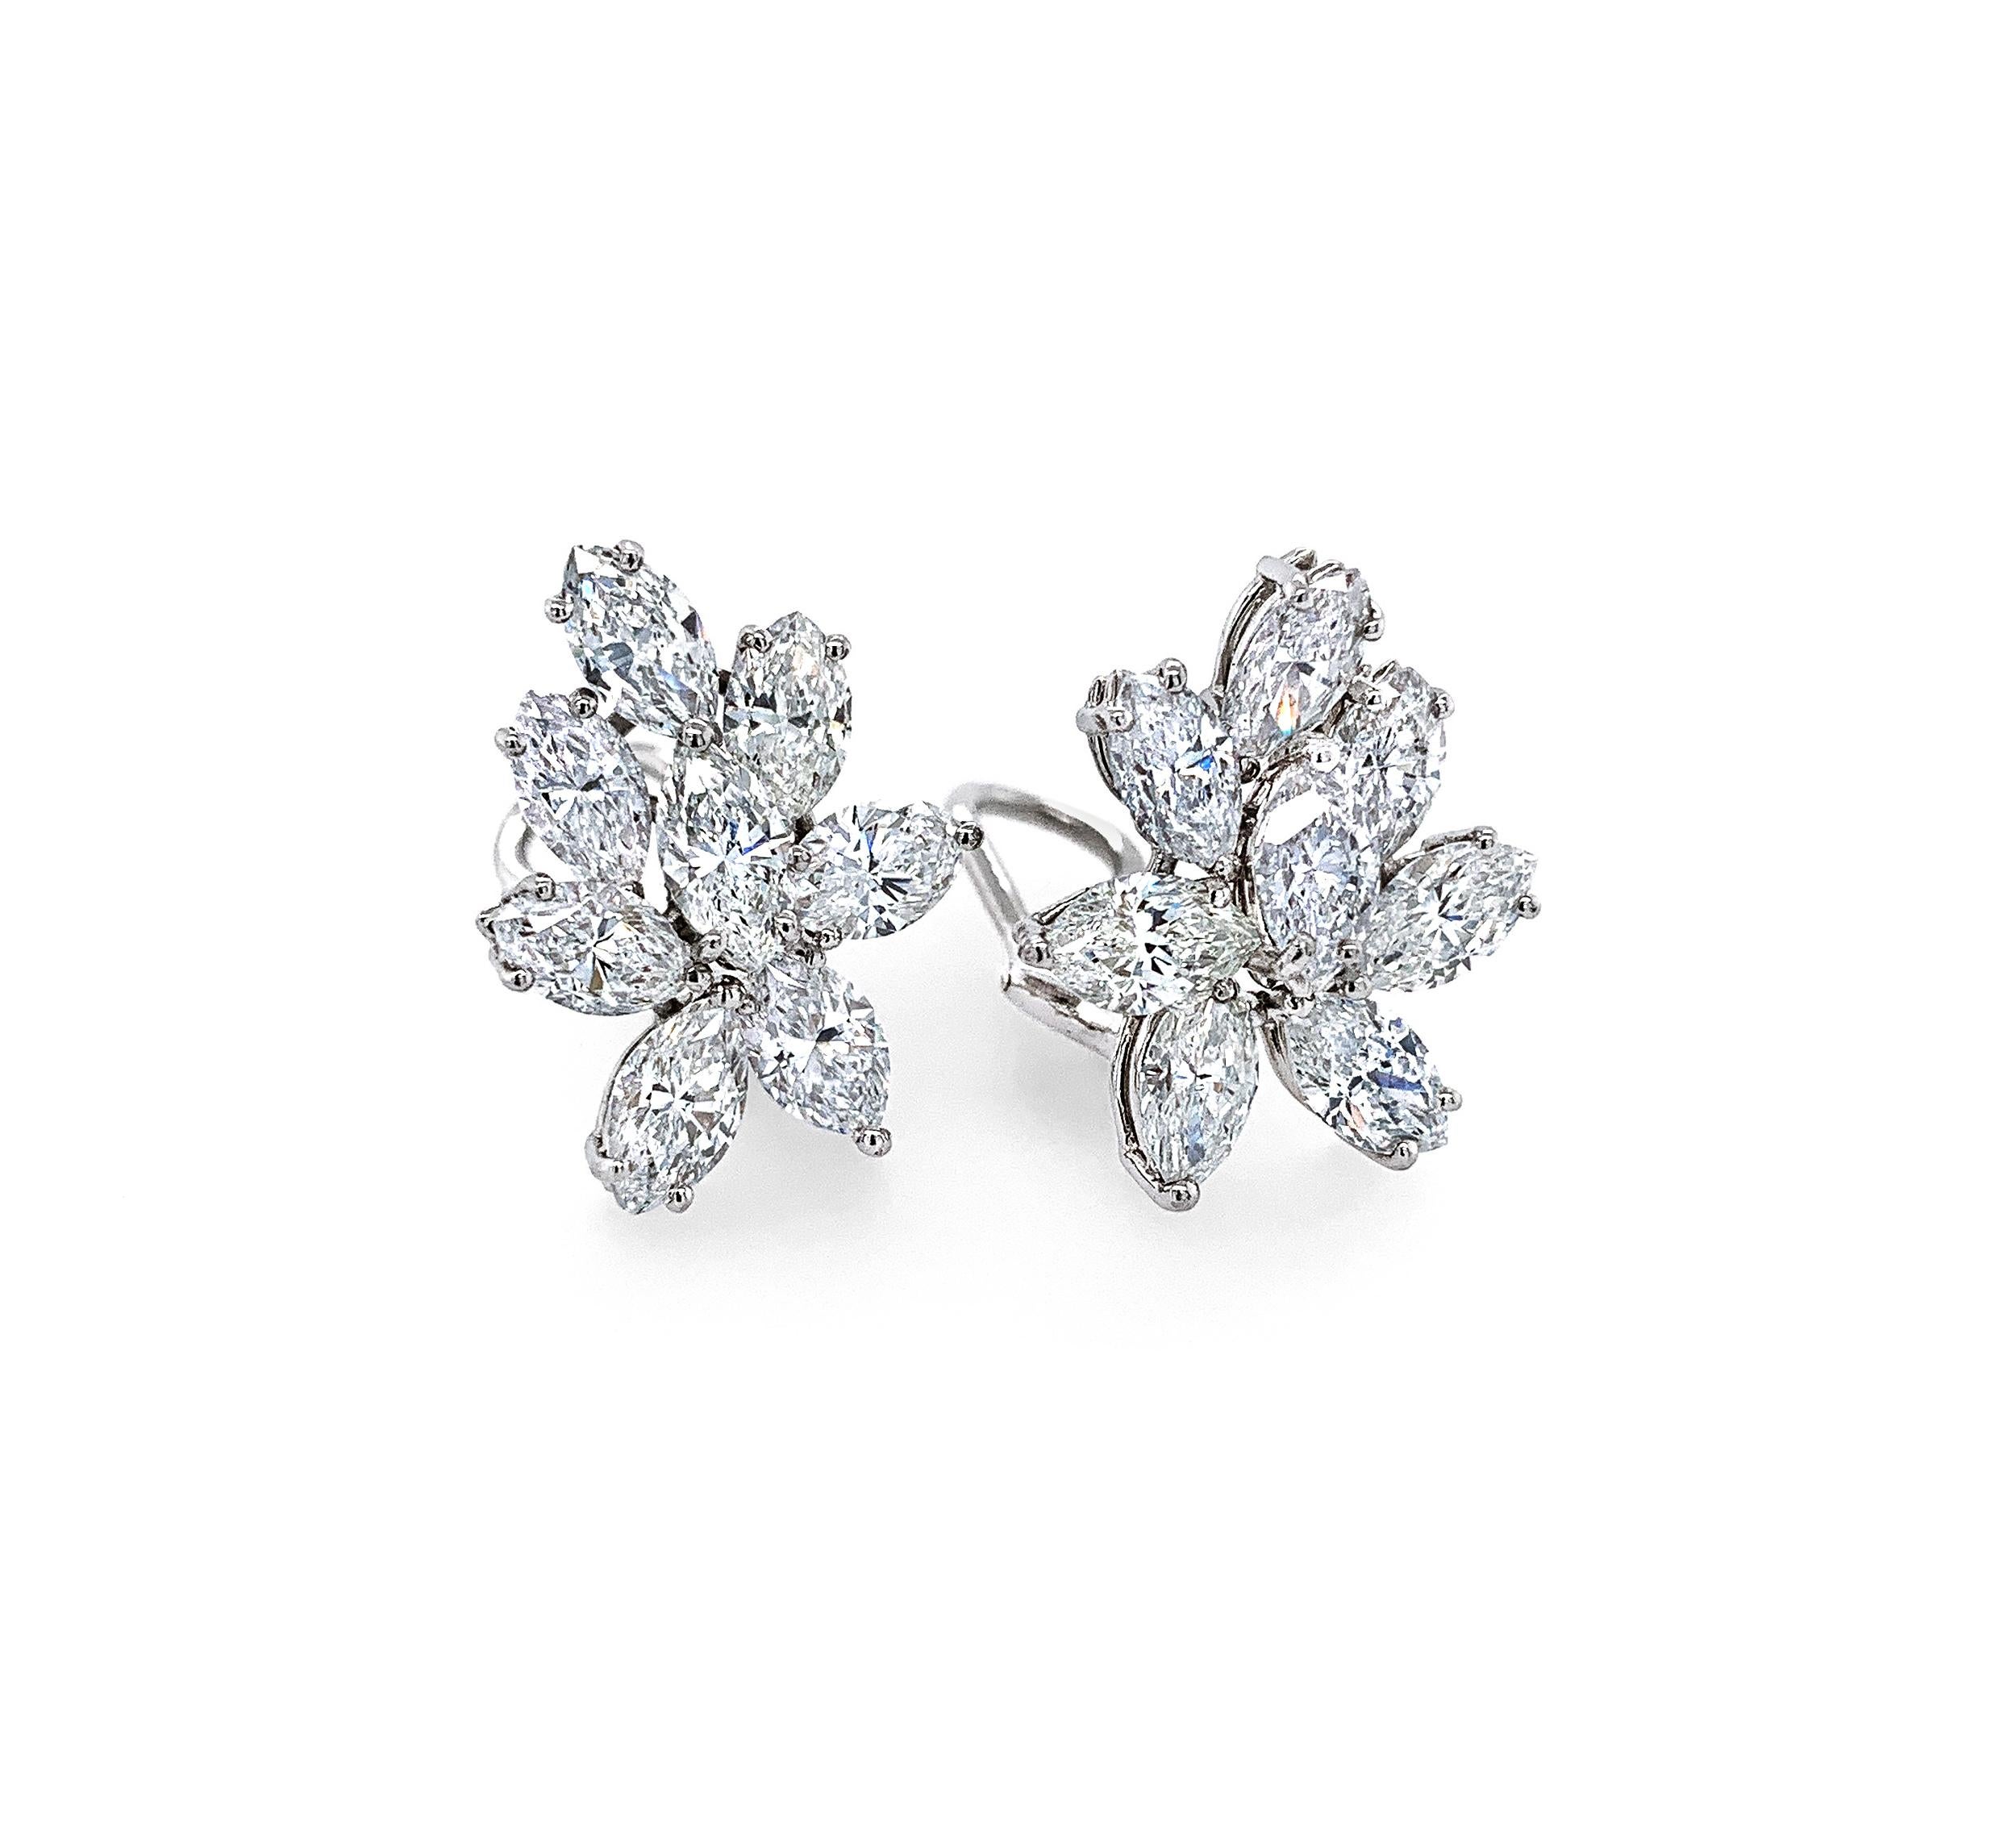 6.57 Carat (total weight) Marquise cut Diamond cluster earrings set in Platinum with Omega clip backs.